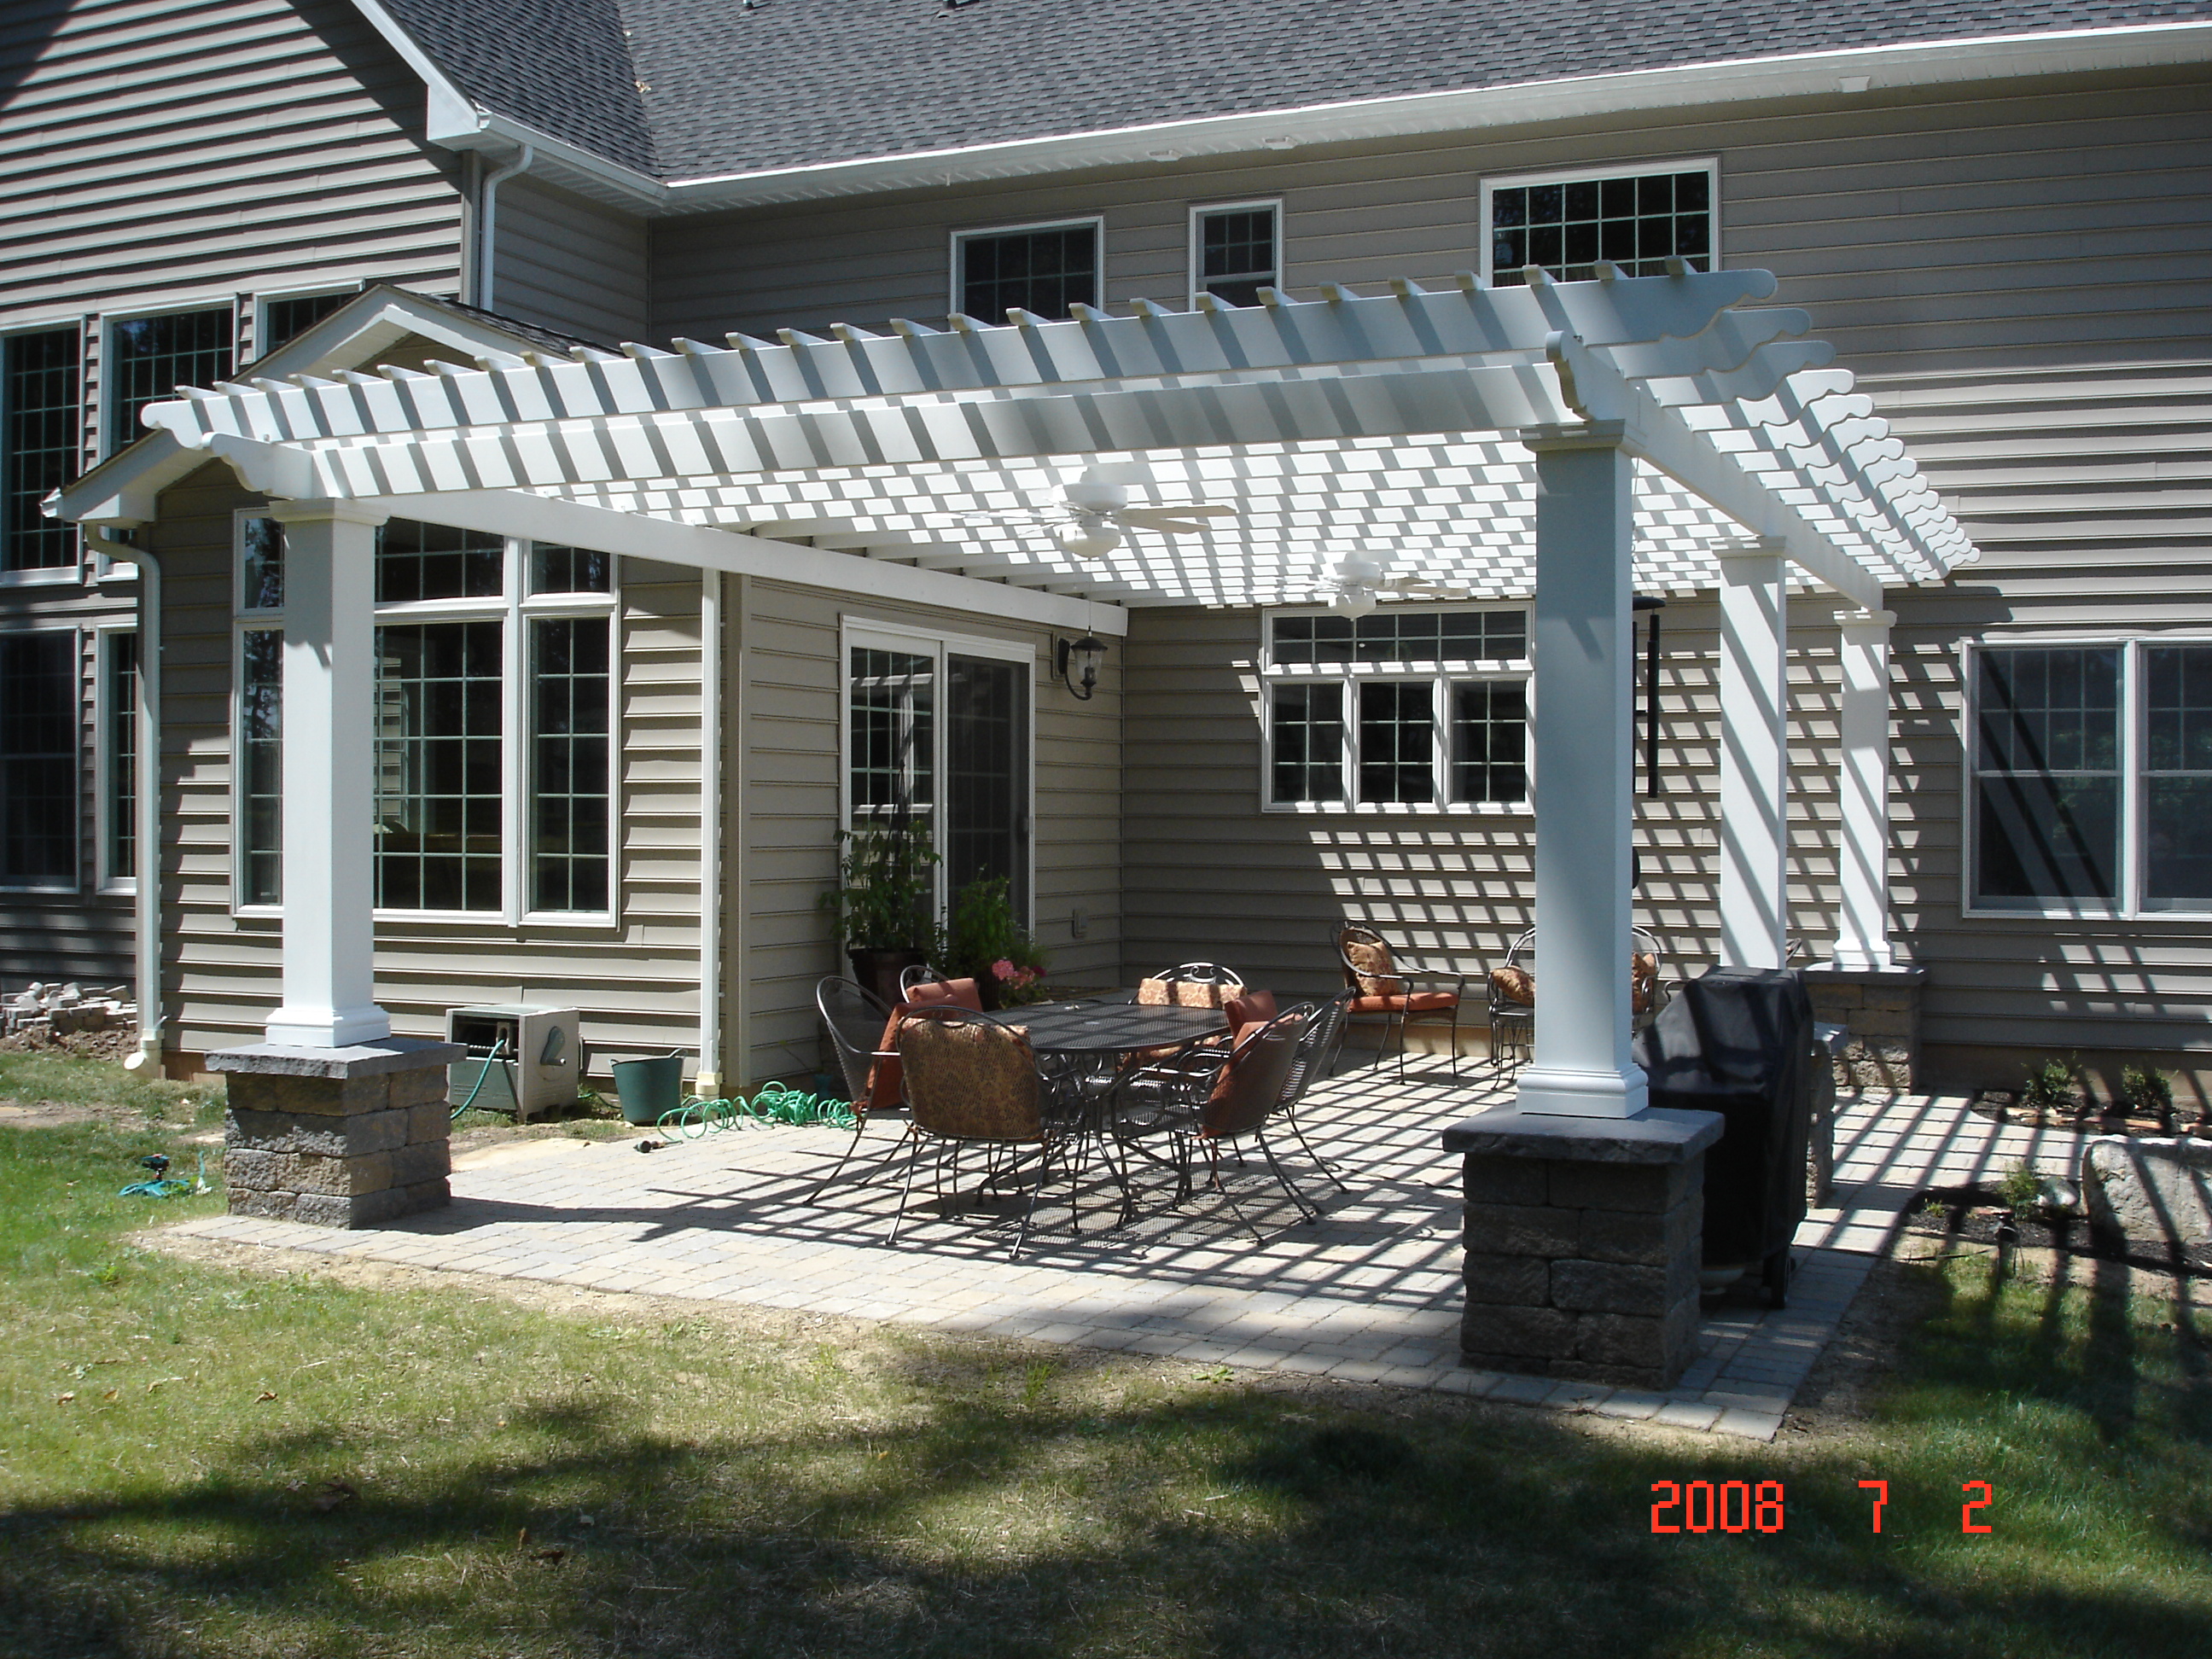 Attached to the house, this pergola defines the patio, providing 